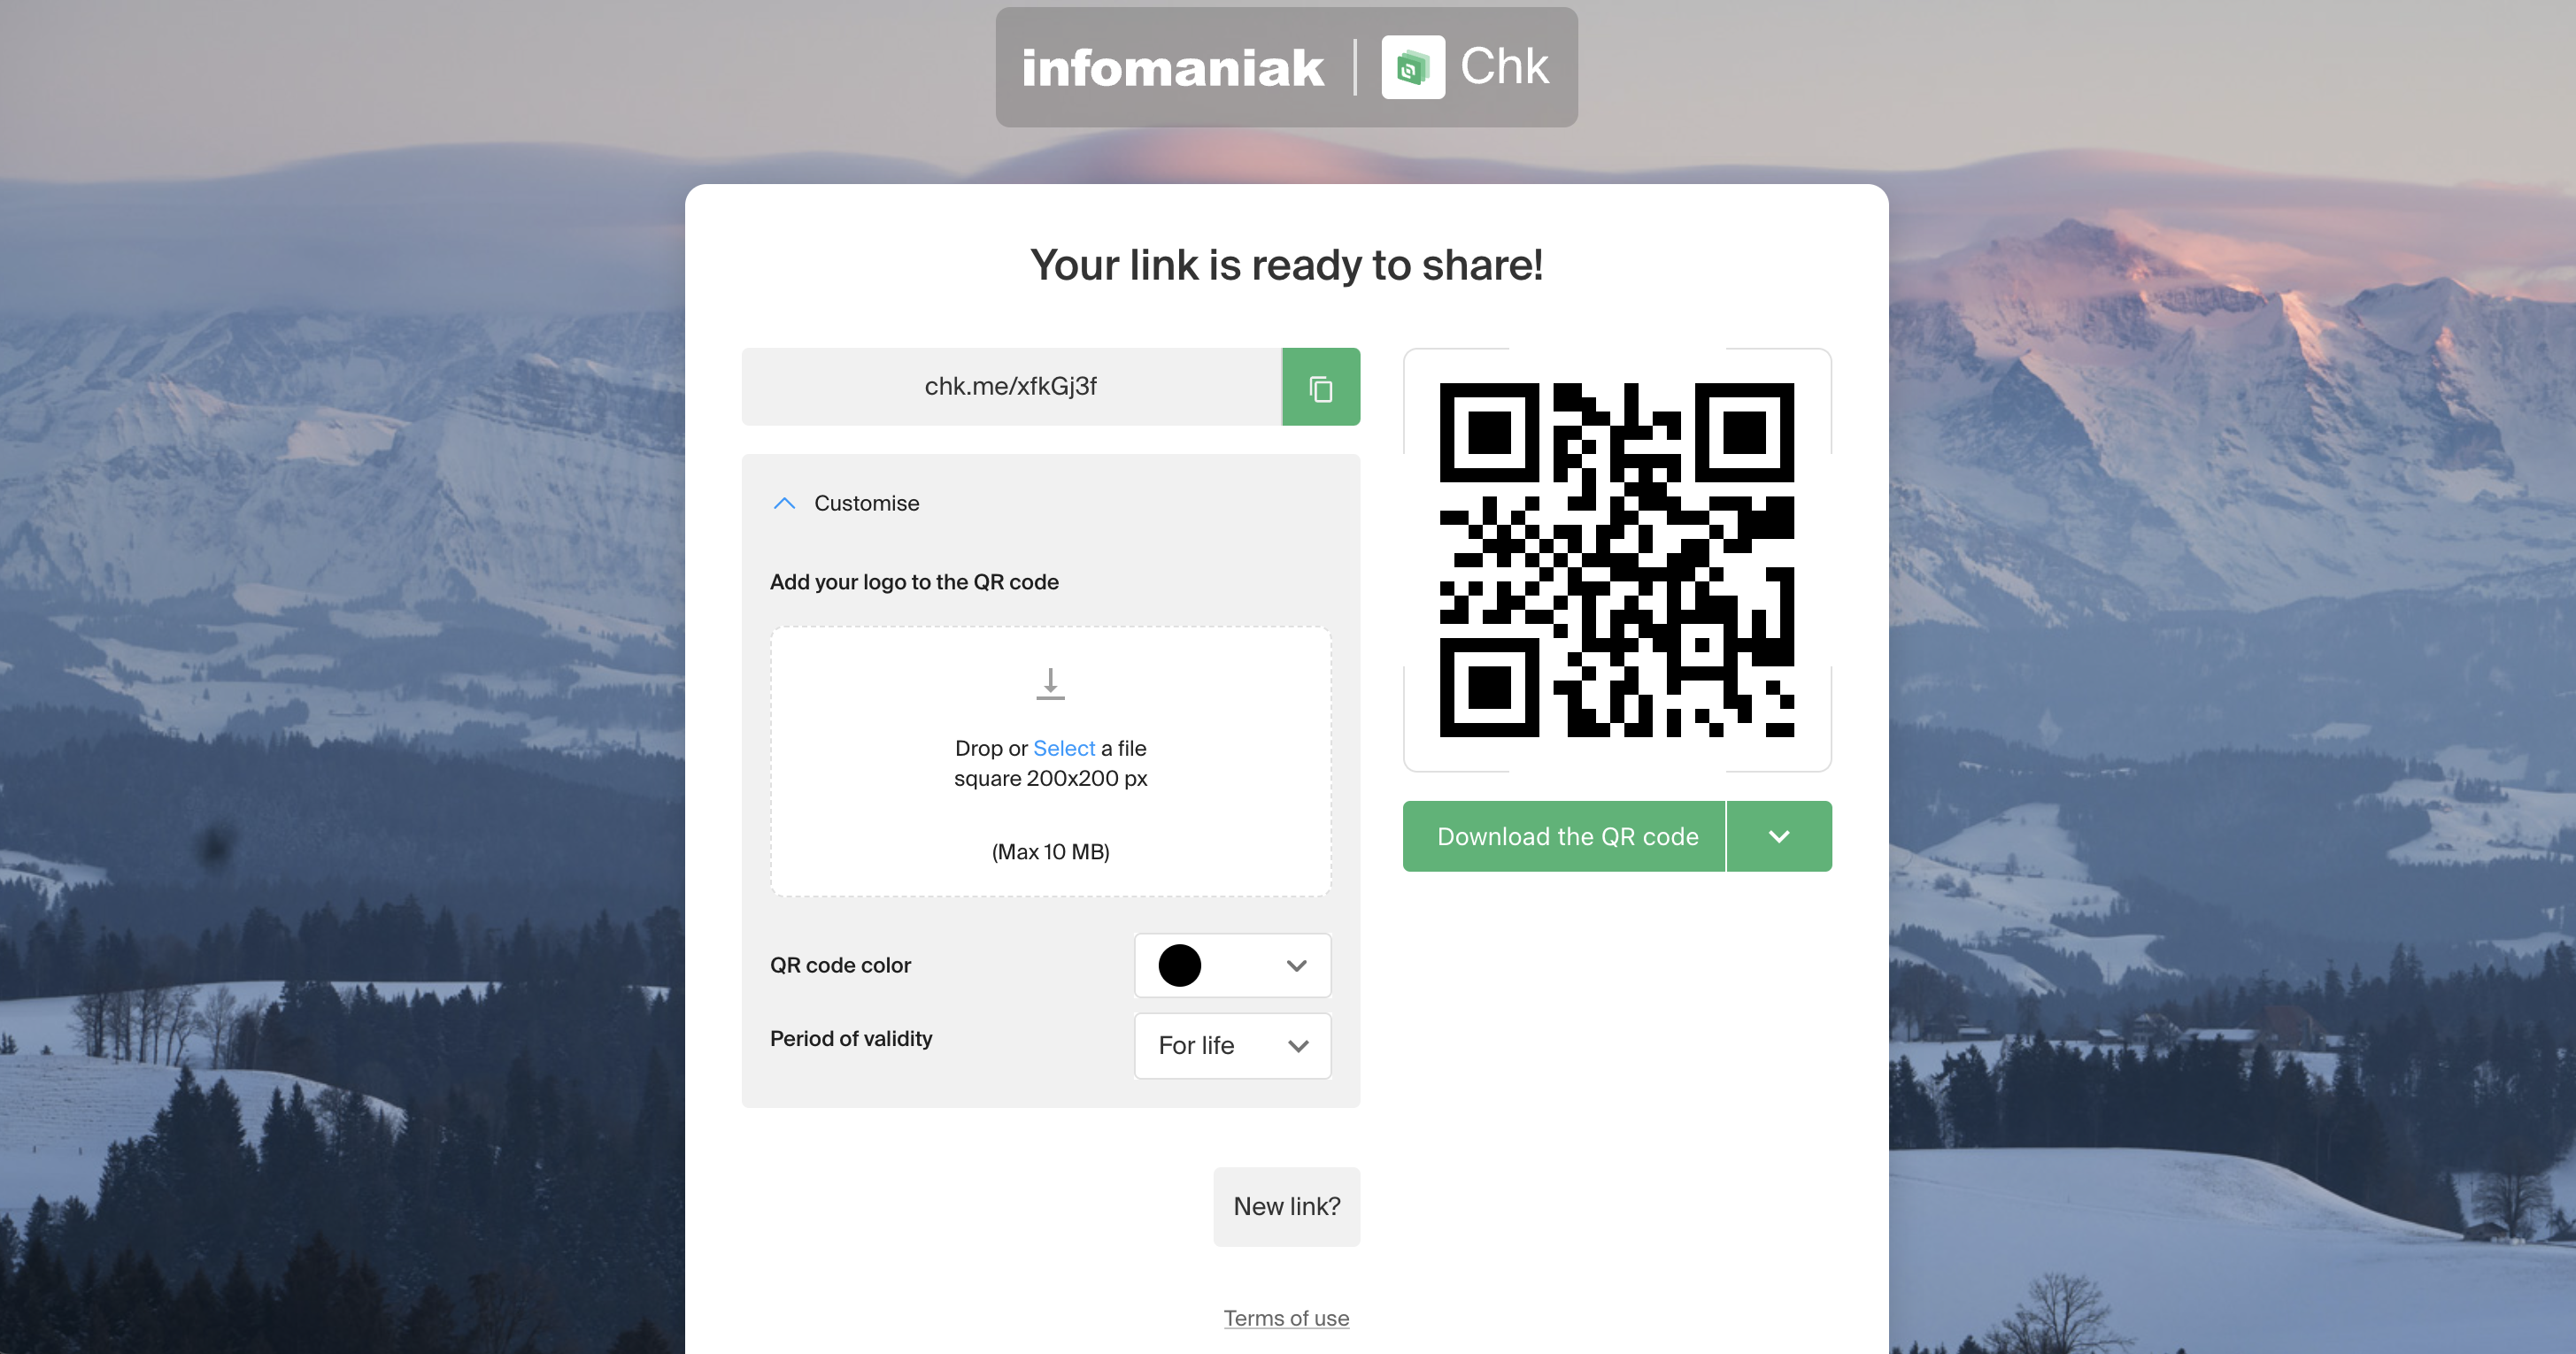 Interface No. 3 : Your link is ready! You also have the option of having a QR code linked to the link, which you can personalize by adding an image, changing the colors and also choosing its validity time. 